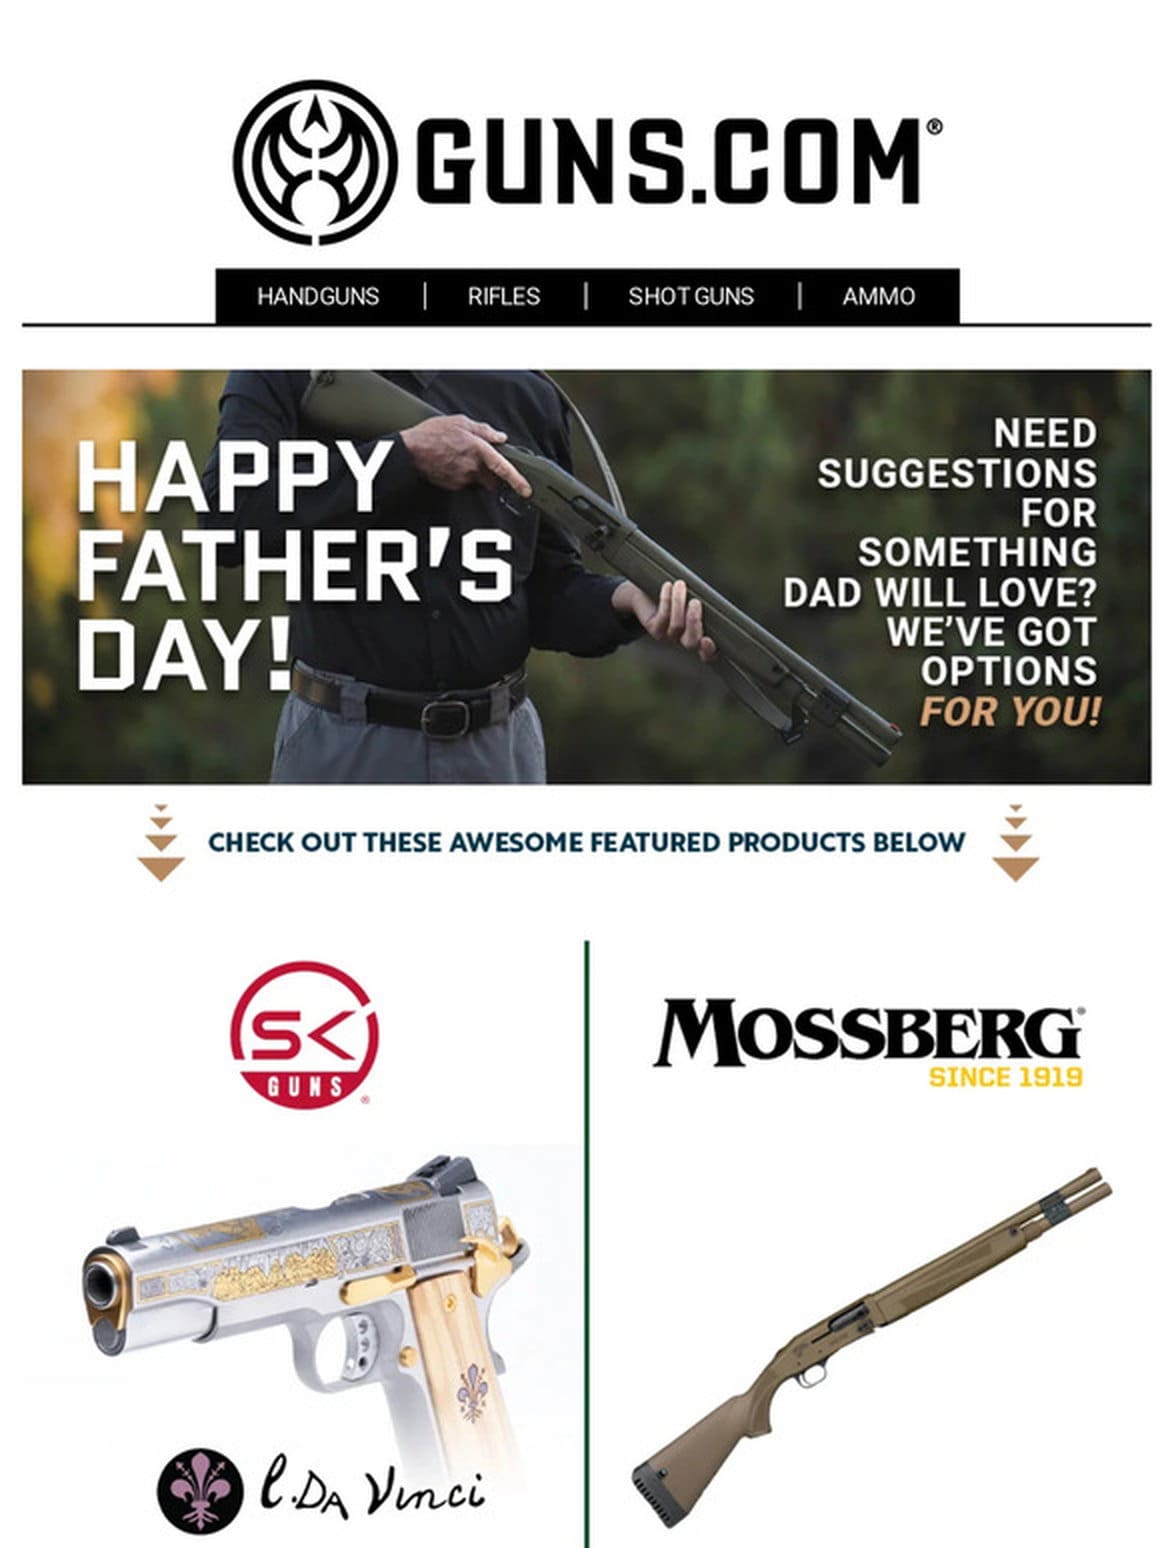 DON’T MISS OUT ? Check Out These Awesome Gift Ideas For Dad!